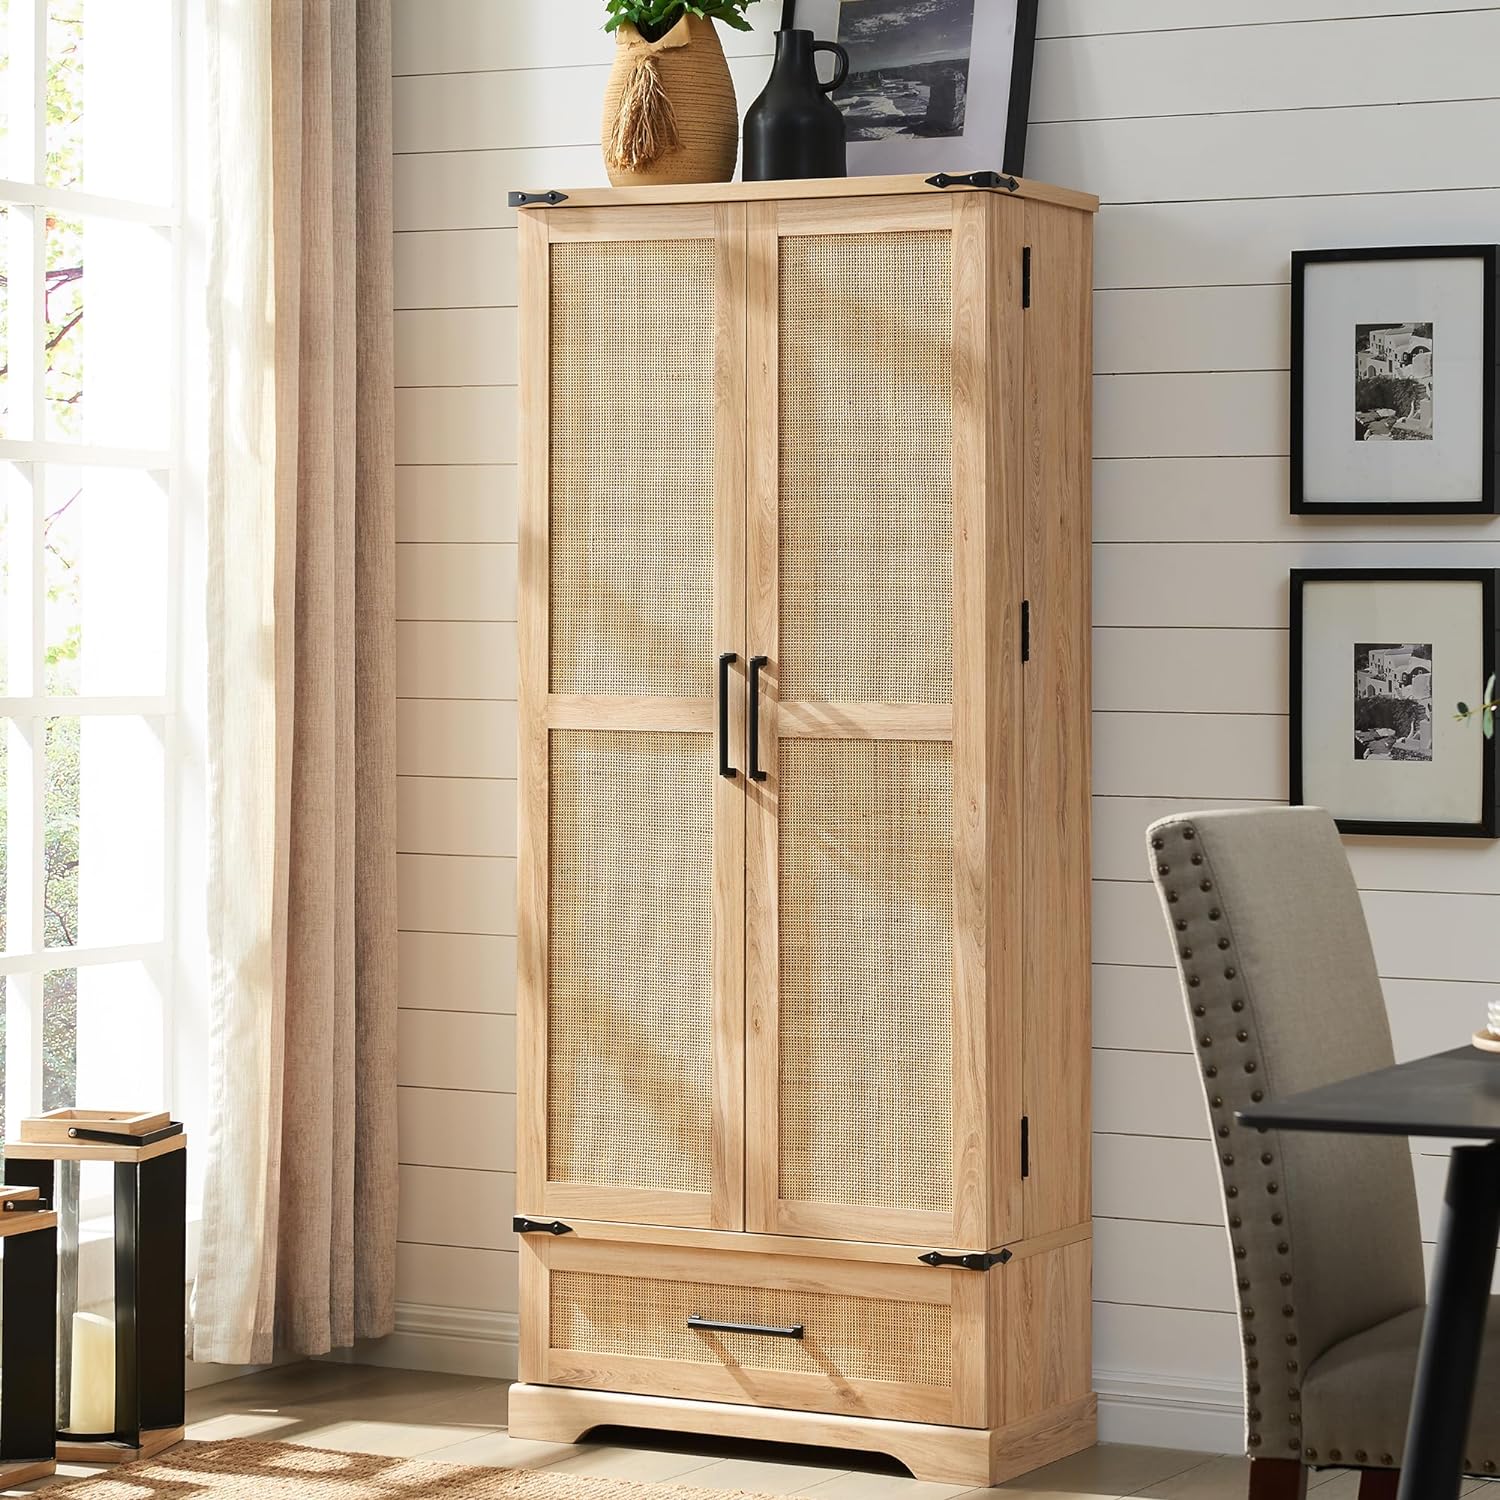 This piece is absolutely beautiful! It has so much storage and is very well built. The attention to detail is really good, to the point that they provide 'tickers' to cover some hardware that you can see when using - those stickers are printed to resemble the same exact color wood & wood grain that the cabinet has. If you didn't know they where there, you would never notice. The only negative was the sheer number of pieces and the time it took to put together. It wasn't difficult to put togethe